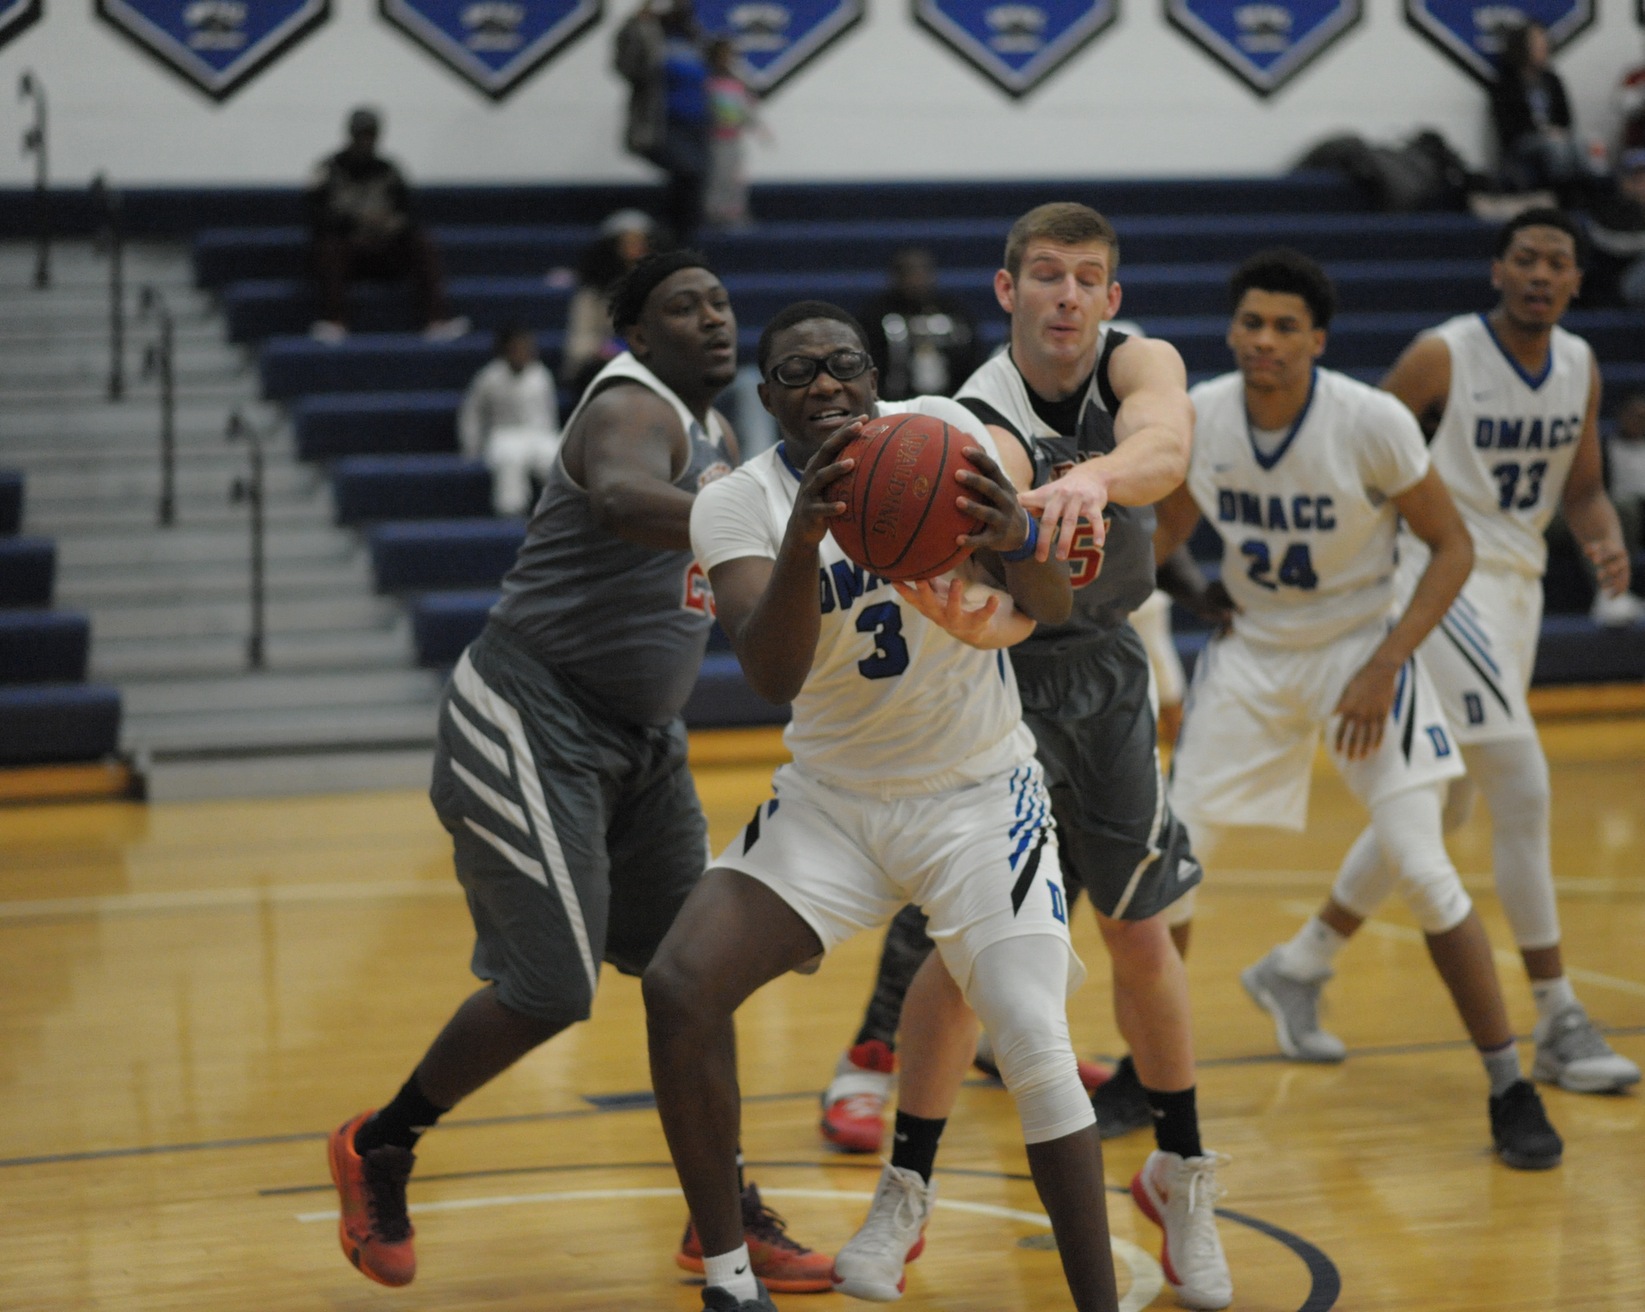 Wali Parks fights for rebound during DMACC's win vs. Hibbing